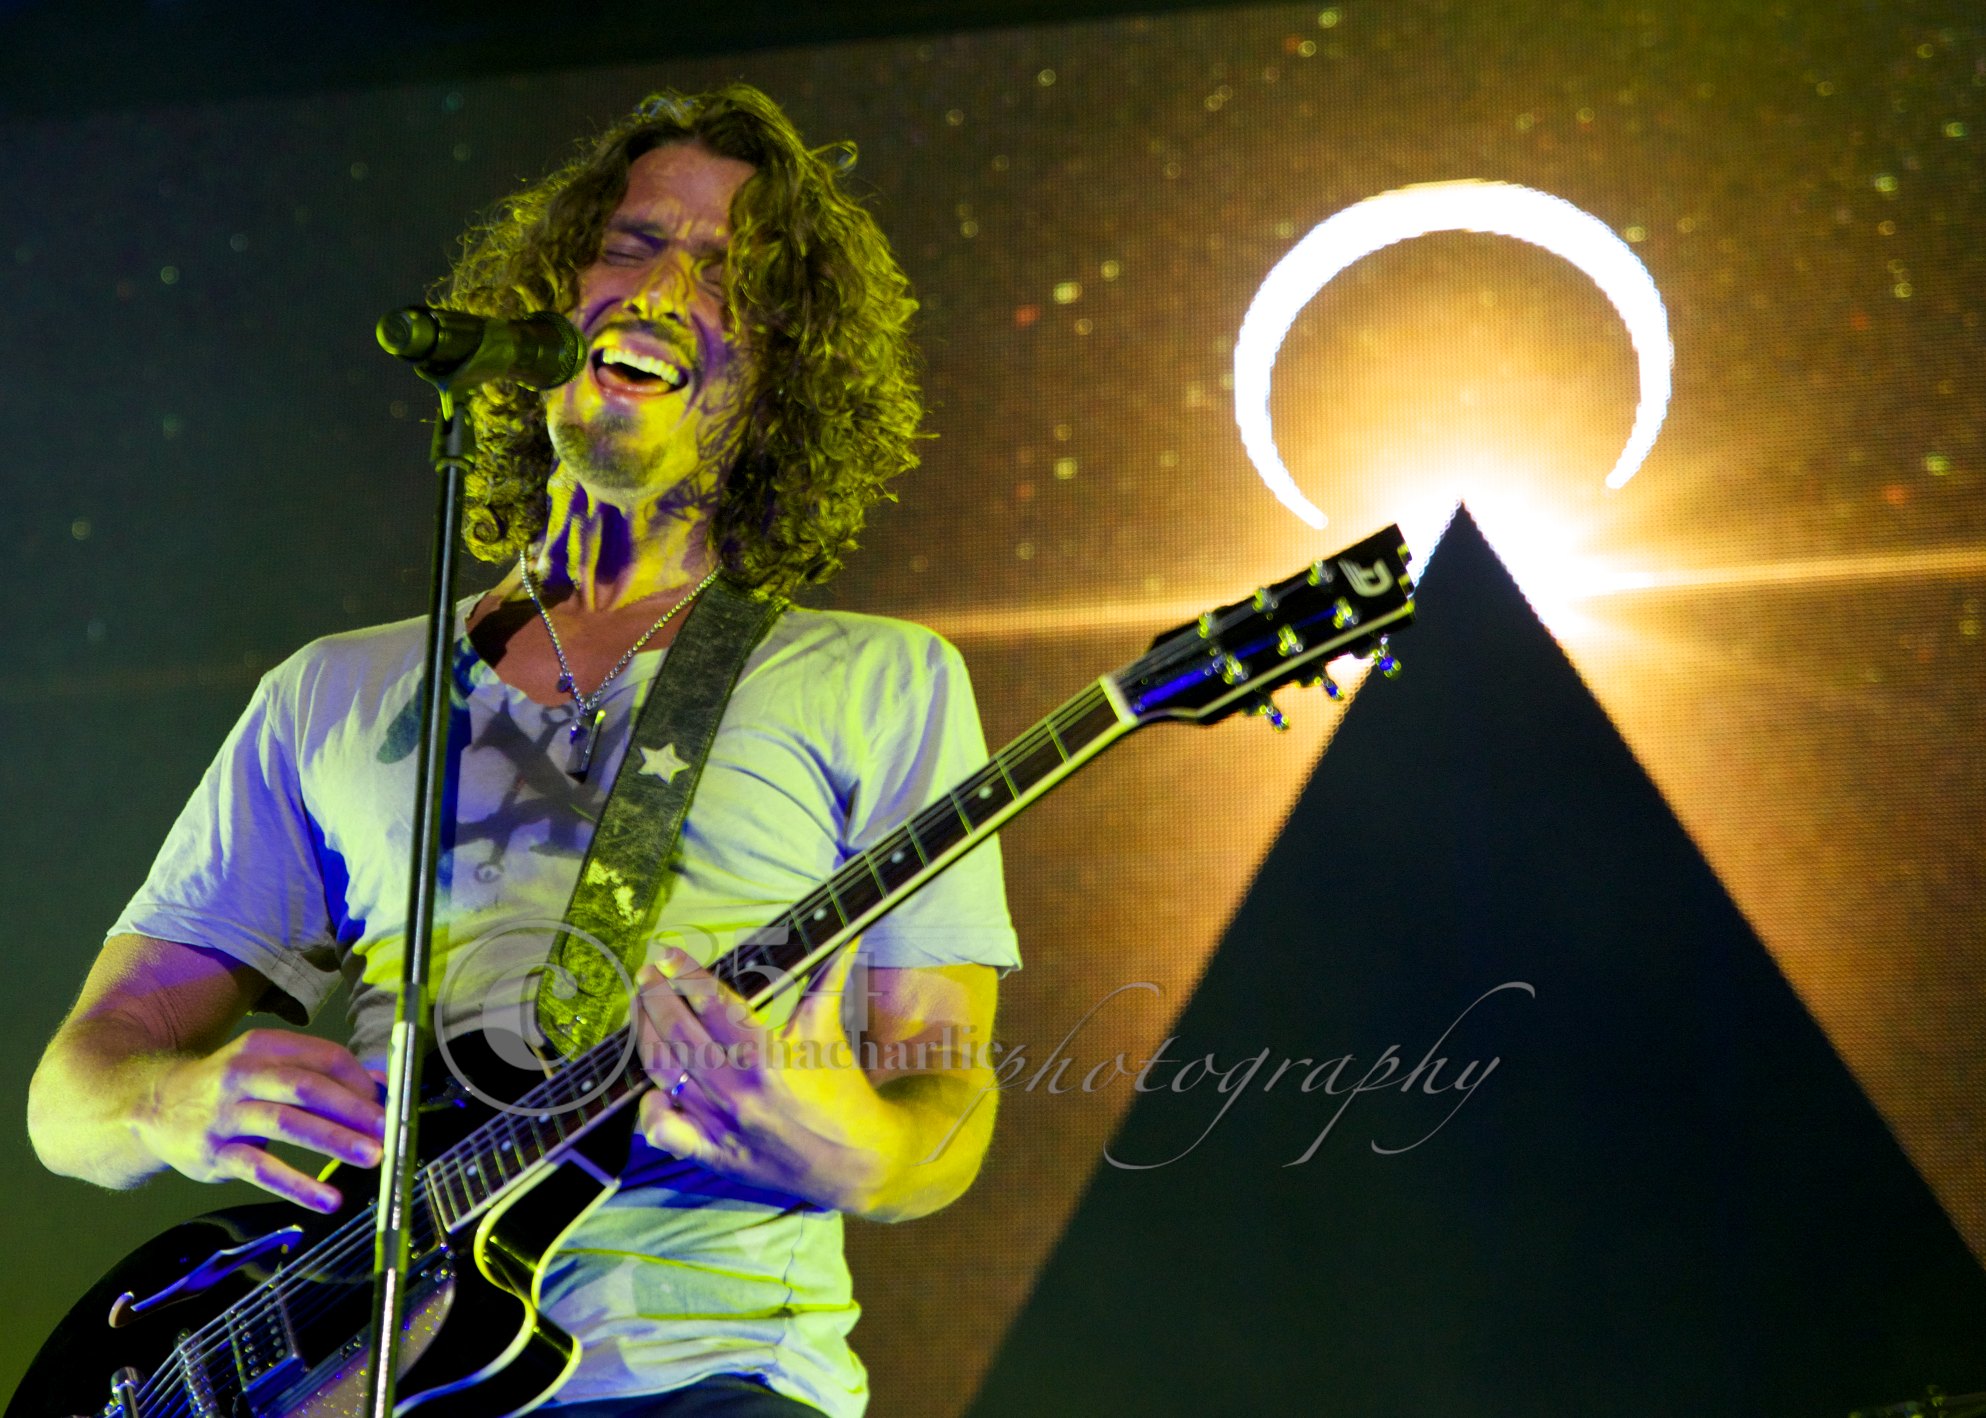 Soundgarden at White River Ampitheatre (Photo by Mocha Charlie)